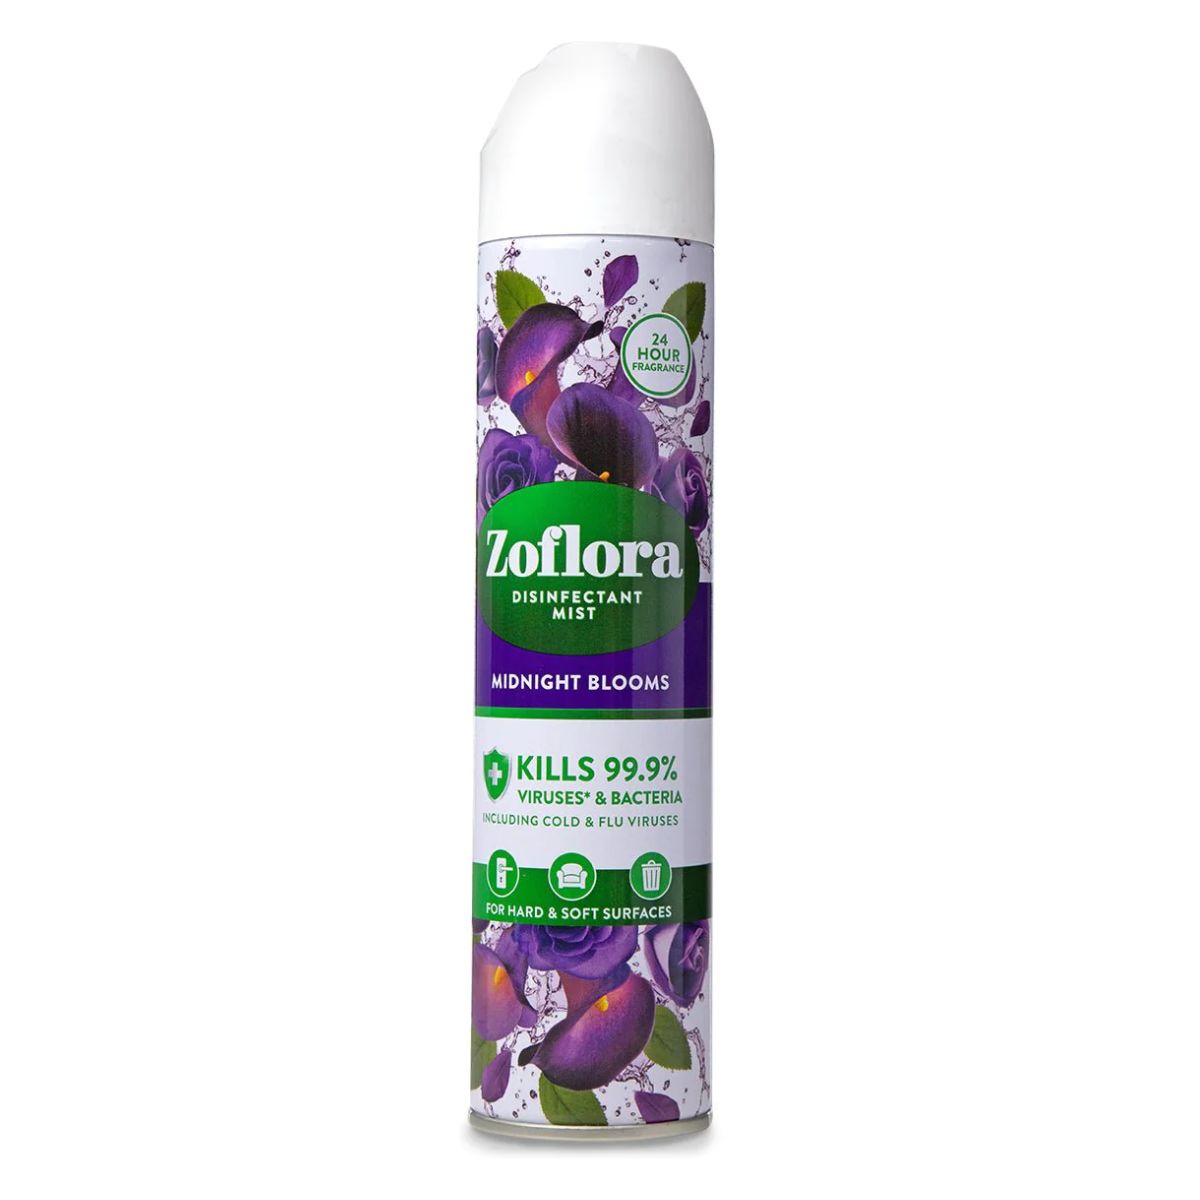 Zoflora Midnight Blooms deodorant spray with purple flowers on a white background.